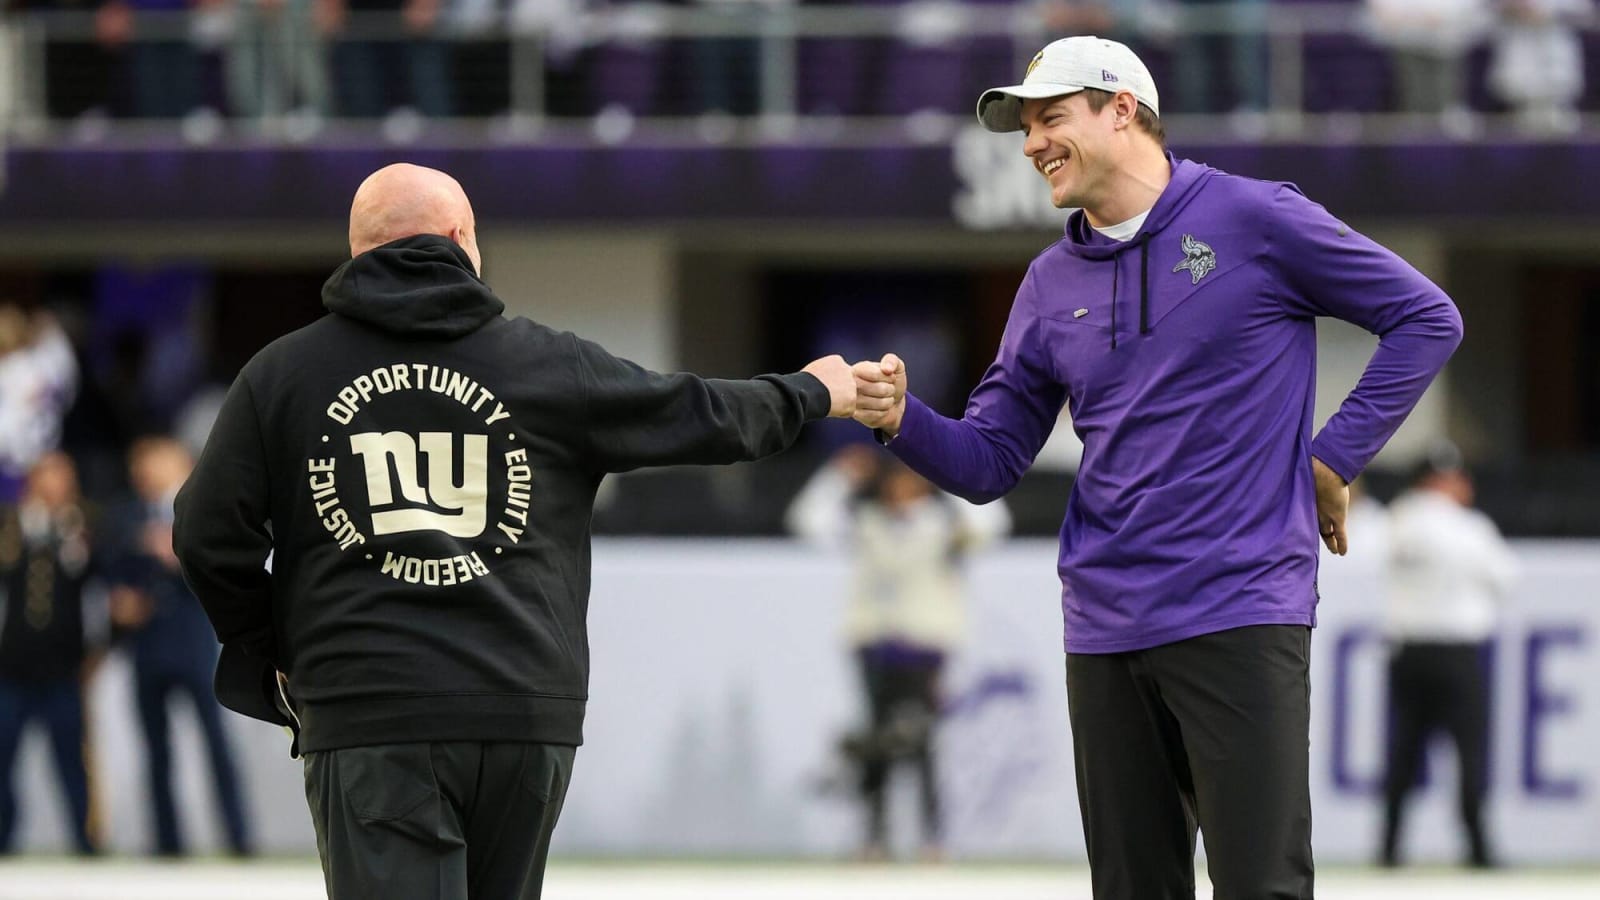 Thor: Key to Vikings’ Draft Lies in Correctly Calling Giants’ Bluff